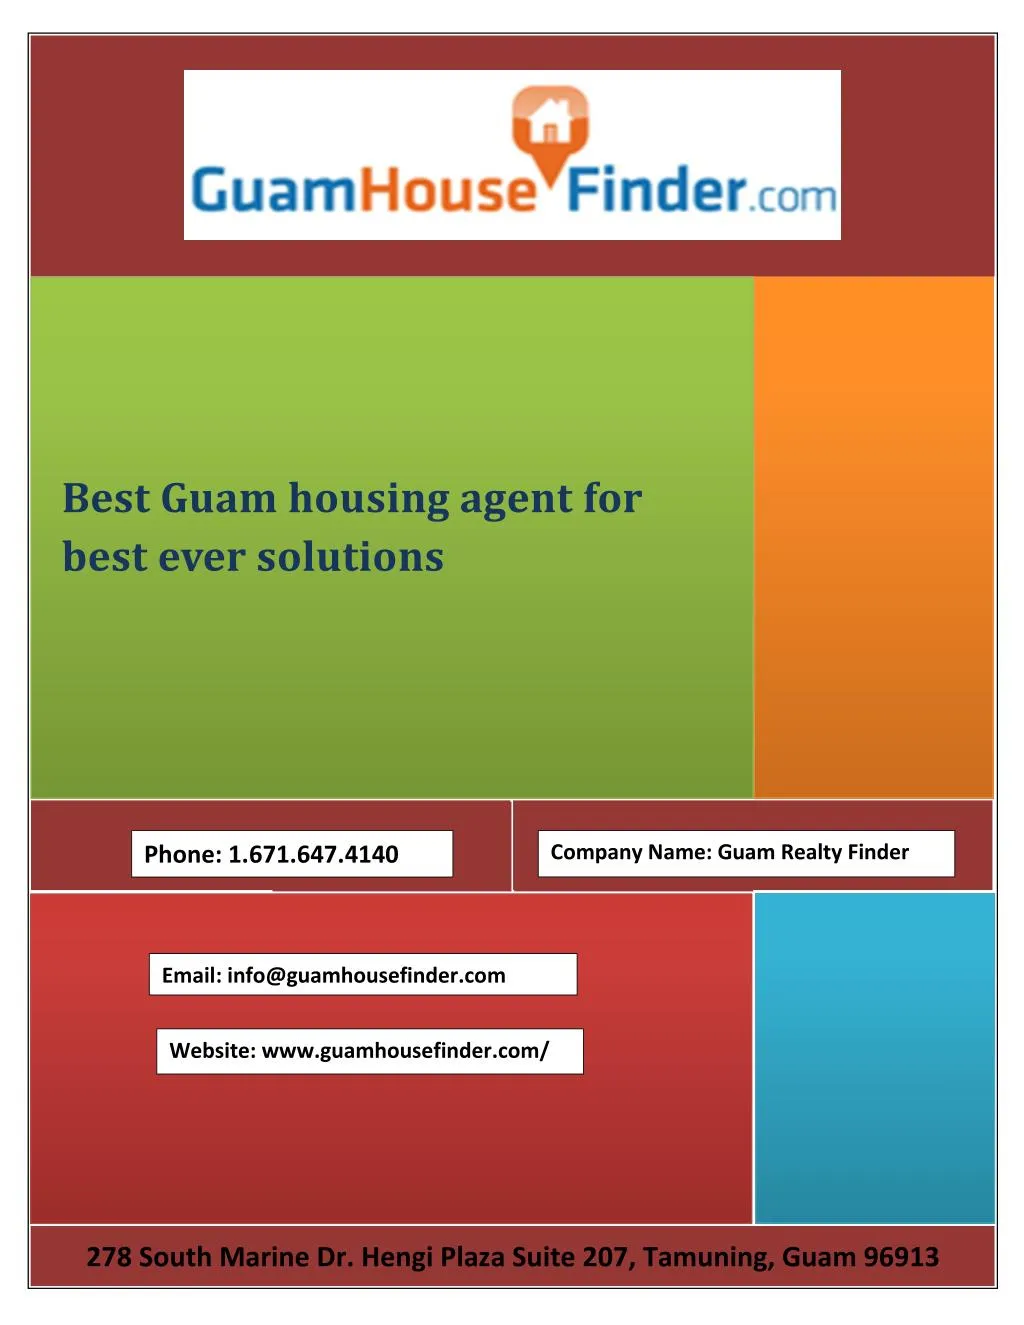 best guam housing agent for best ever solutions